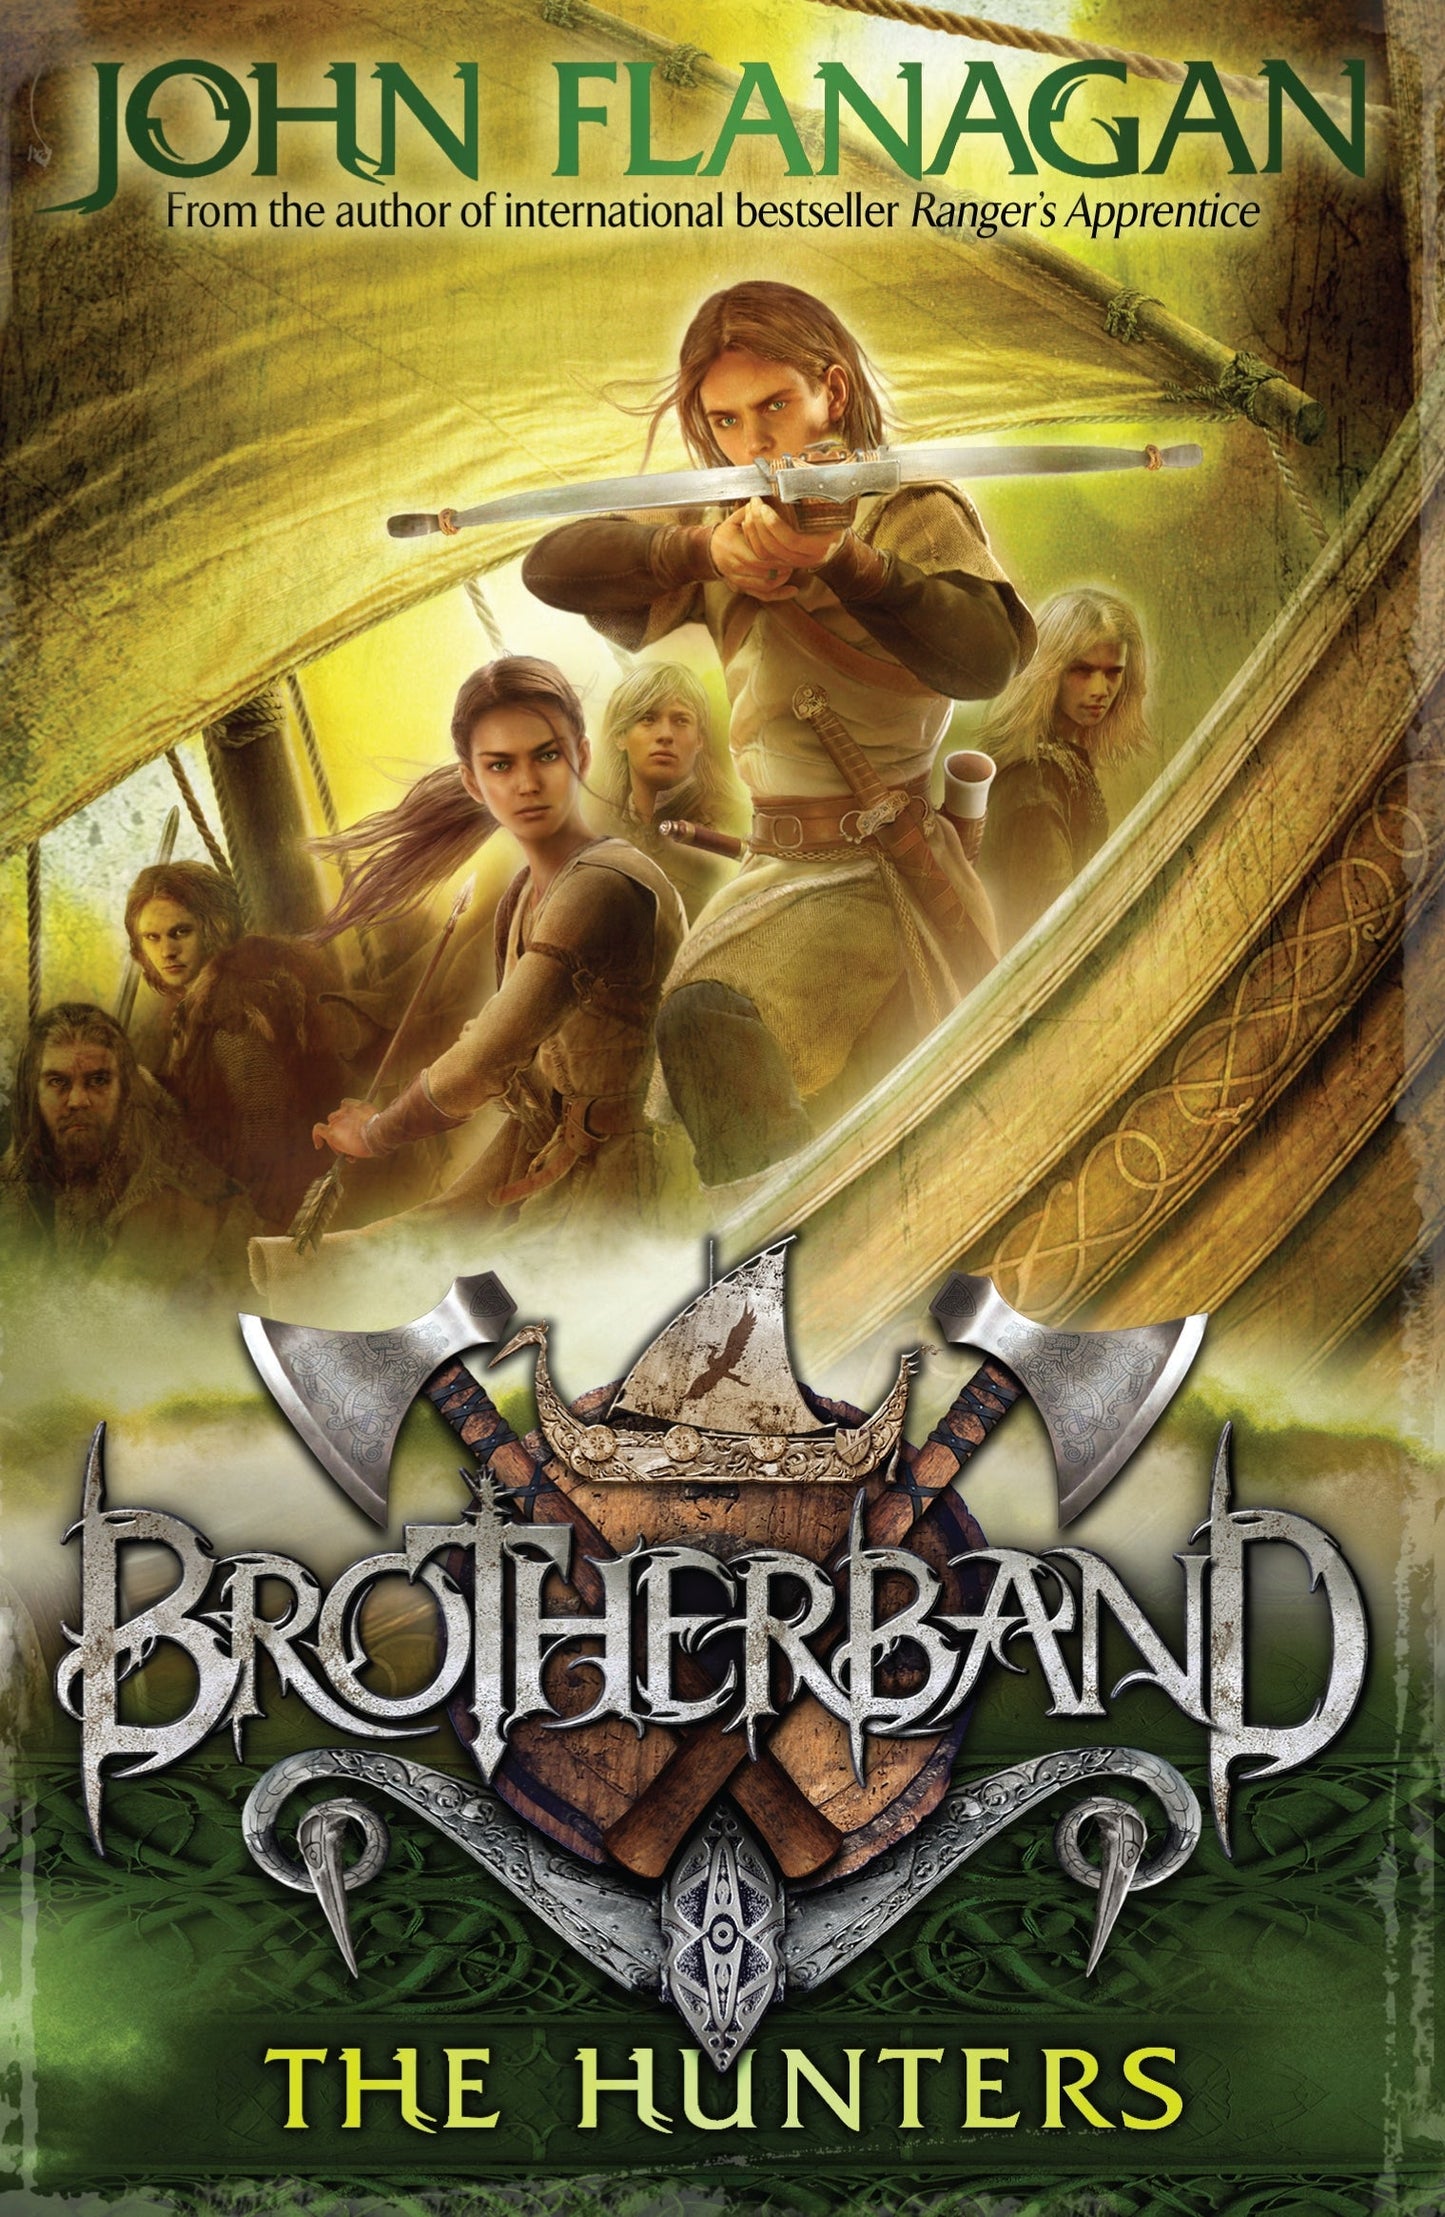 Brotherband: The Hunters